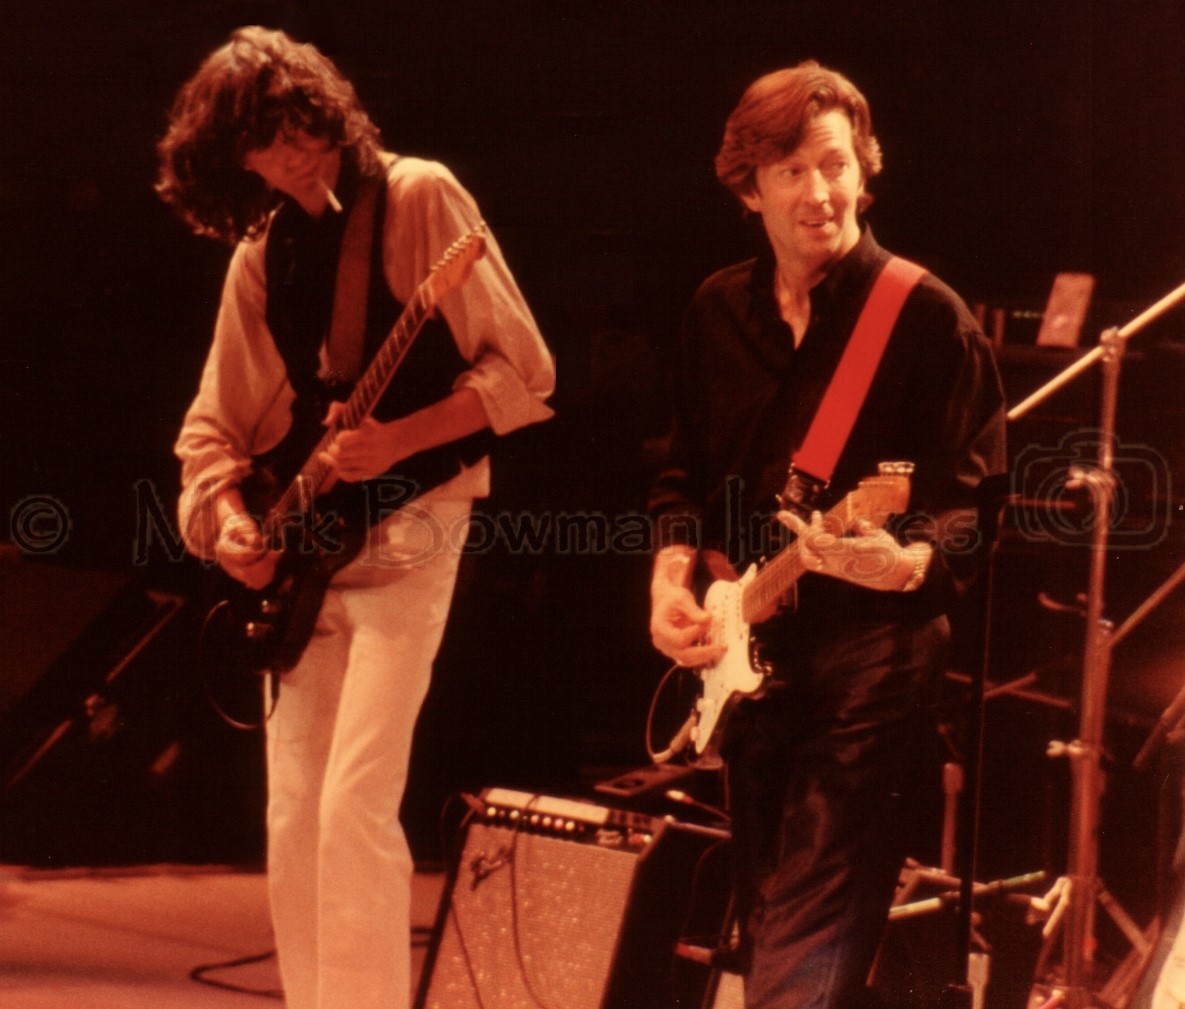 Jimmy Page and Eric Clapton -1983 – MARK BOWMAN IMAGES